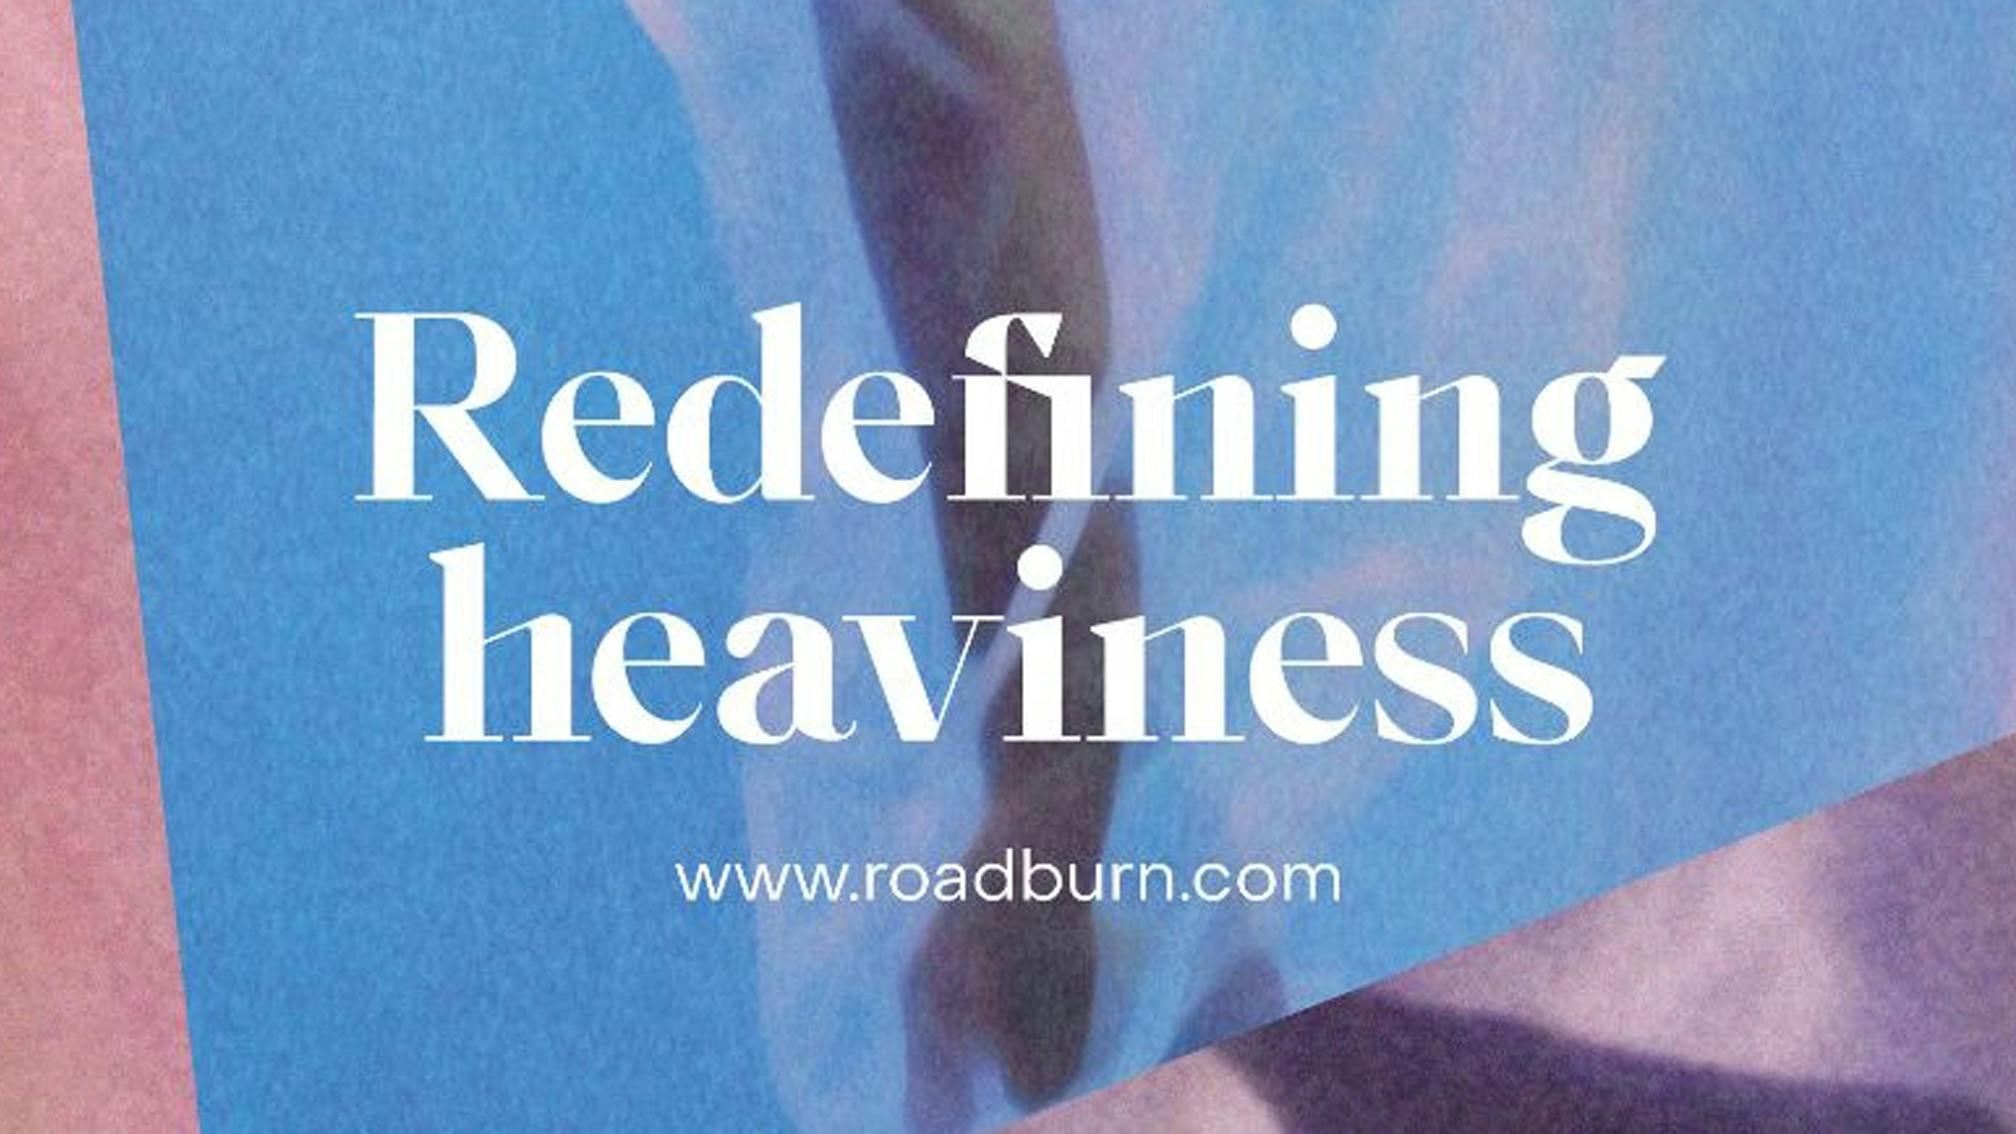 Roadburn makes first 2022 line-up announcement: Ulver, Alcest, Full Of Hell, Backxwash and more